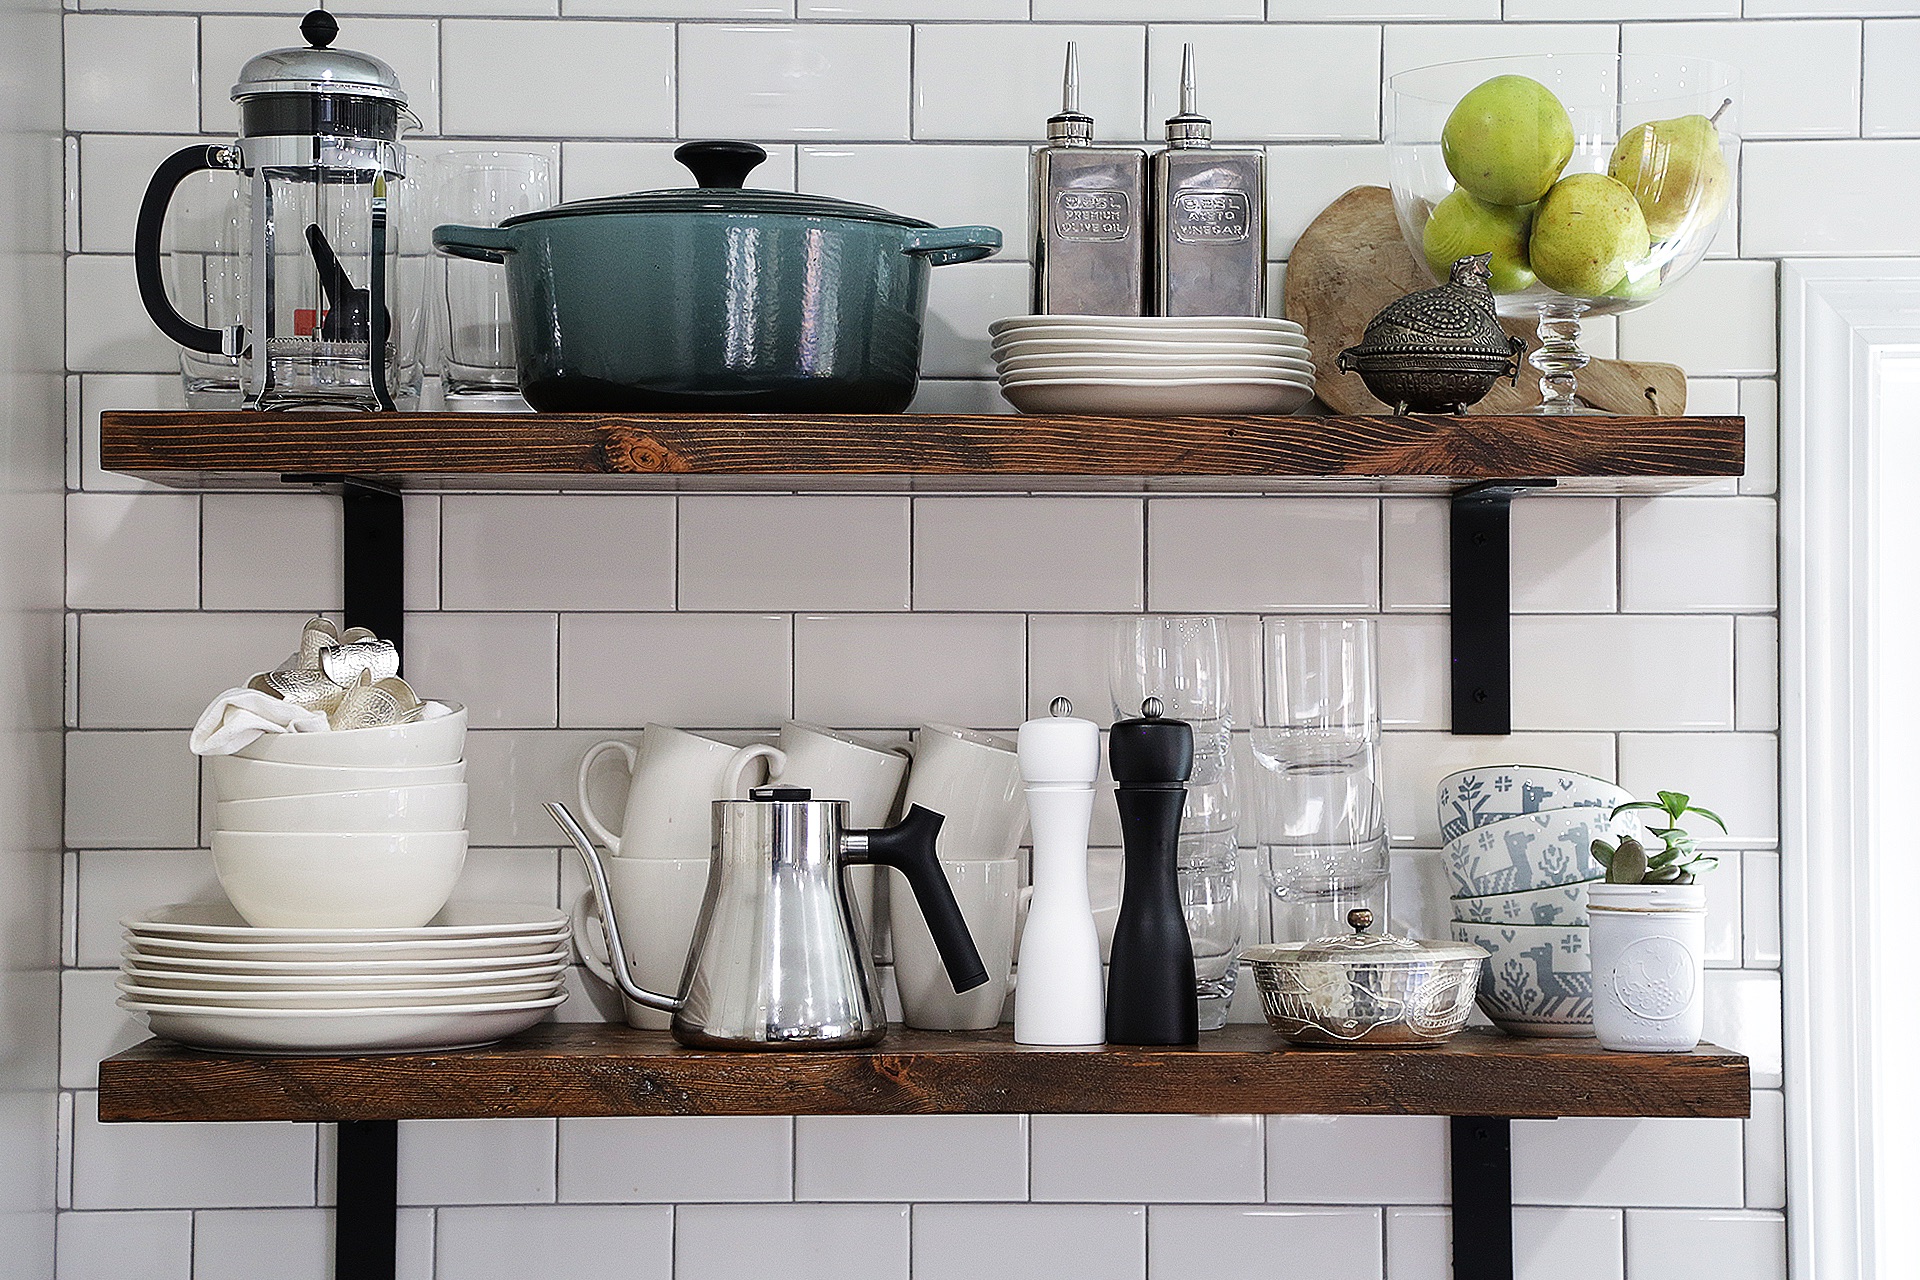 Decorating Exposed Shelving: A Marriage of Style and Function